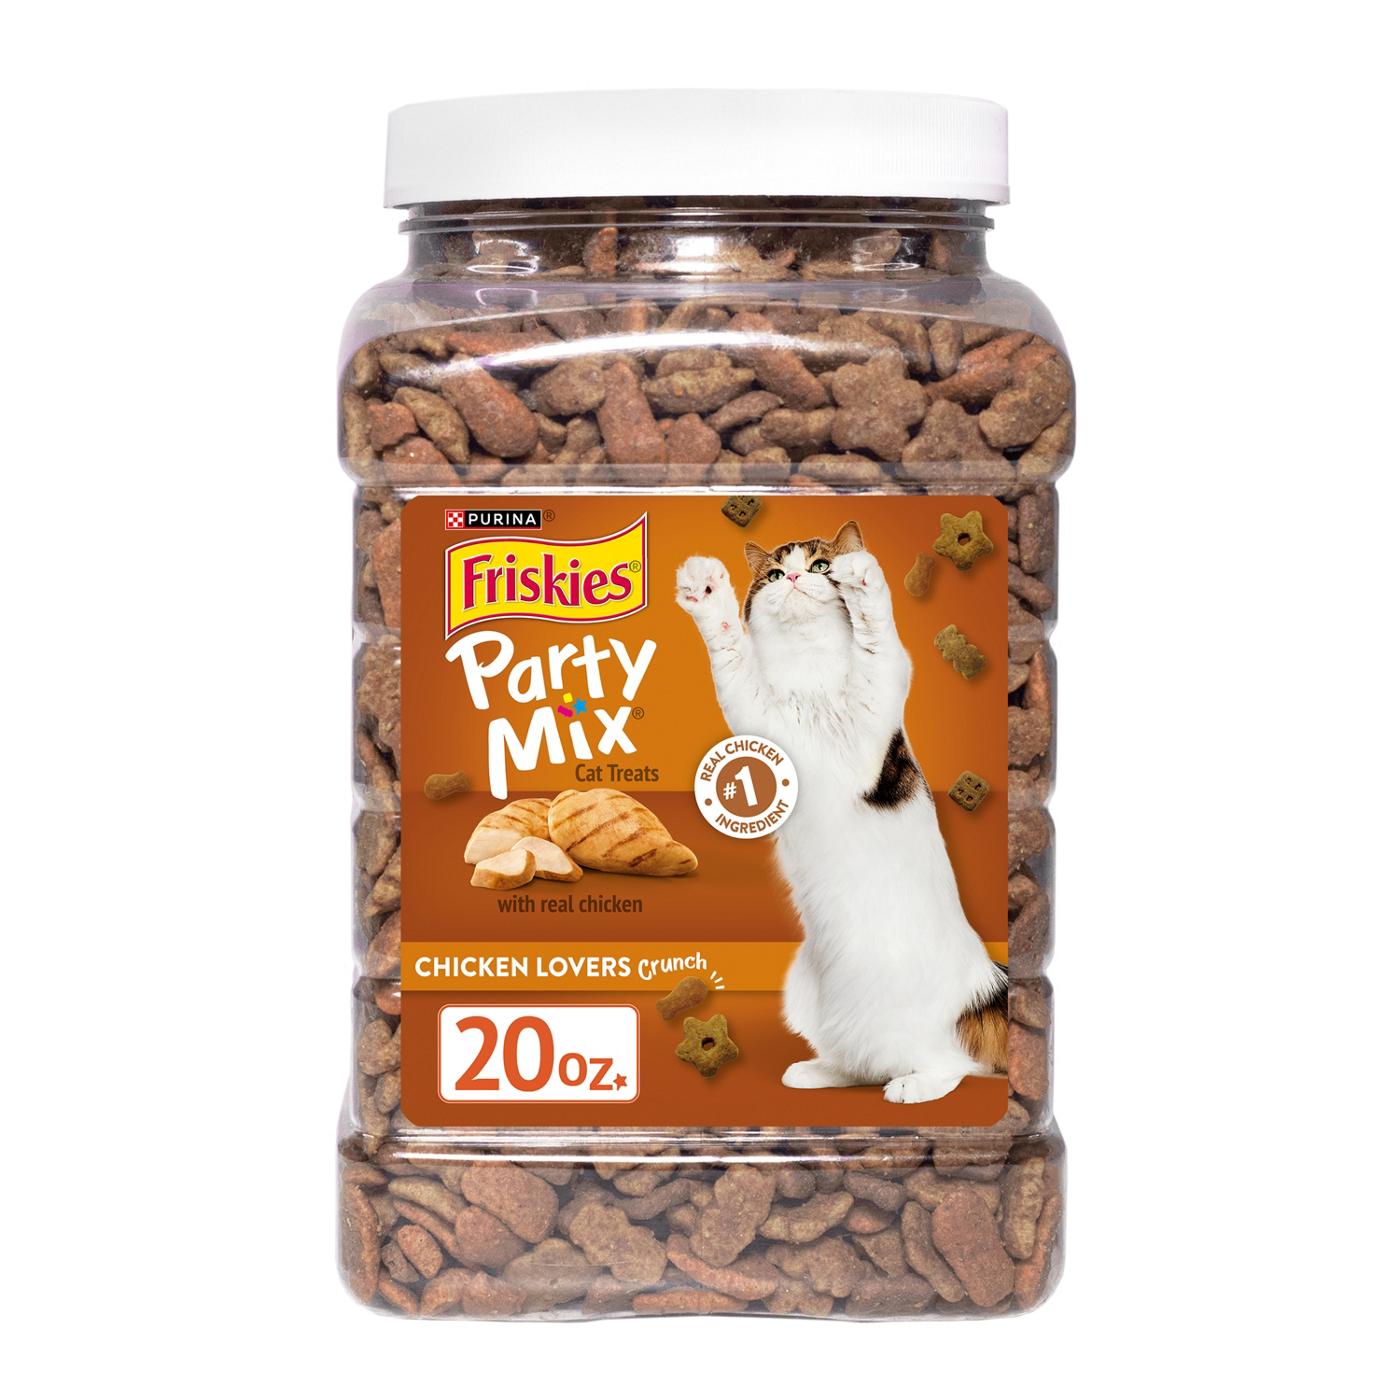 Friskies Purina Friskies Made in USA Facilities Cat Treats, Party Mix Chicken Lovers Crunch; image 1 of 4